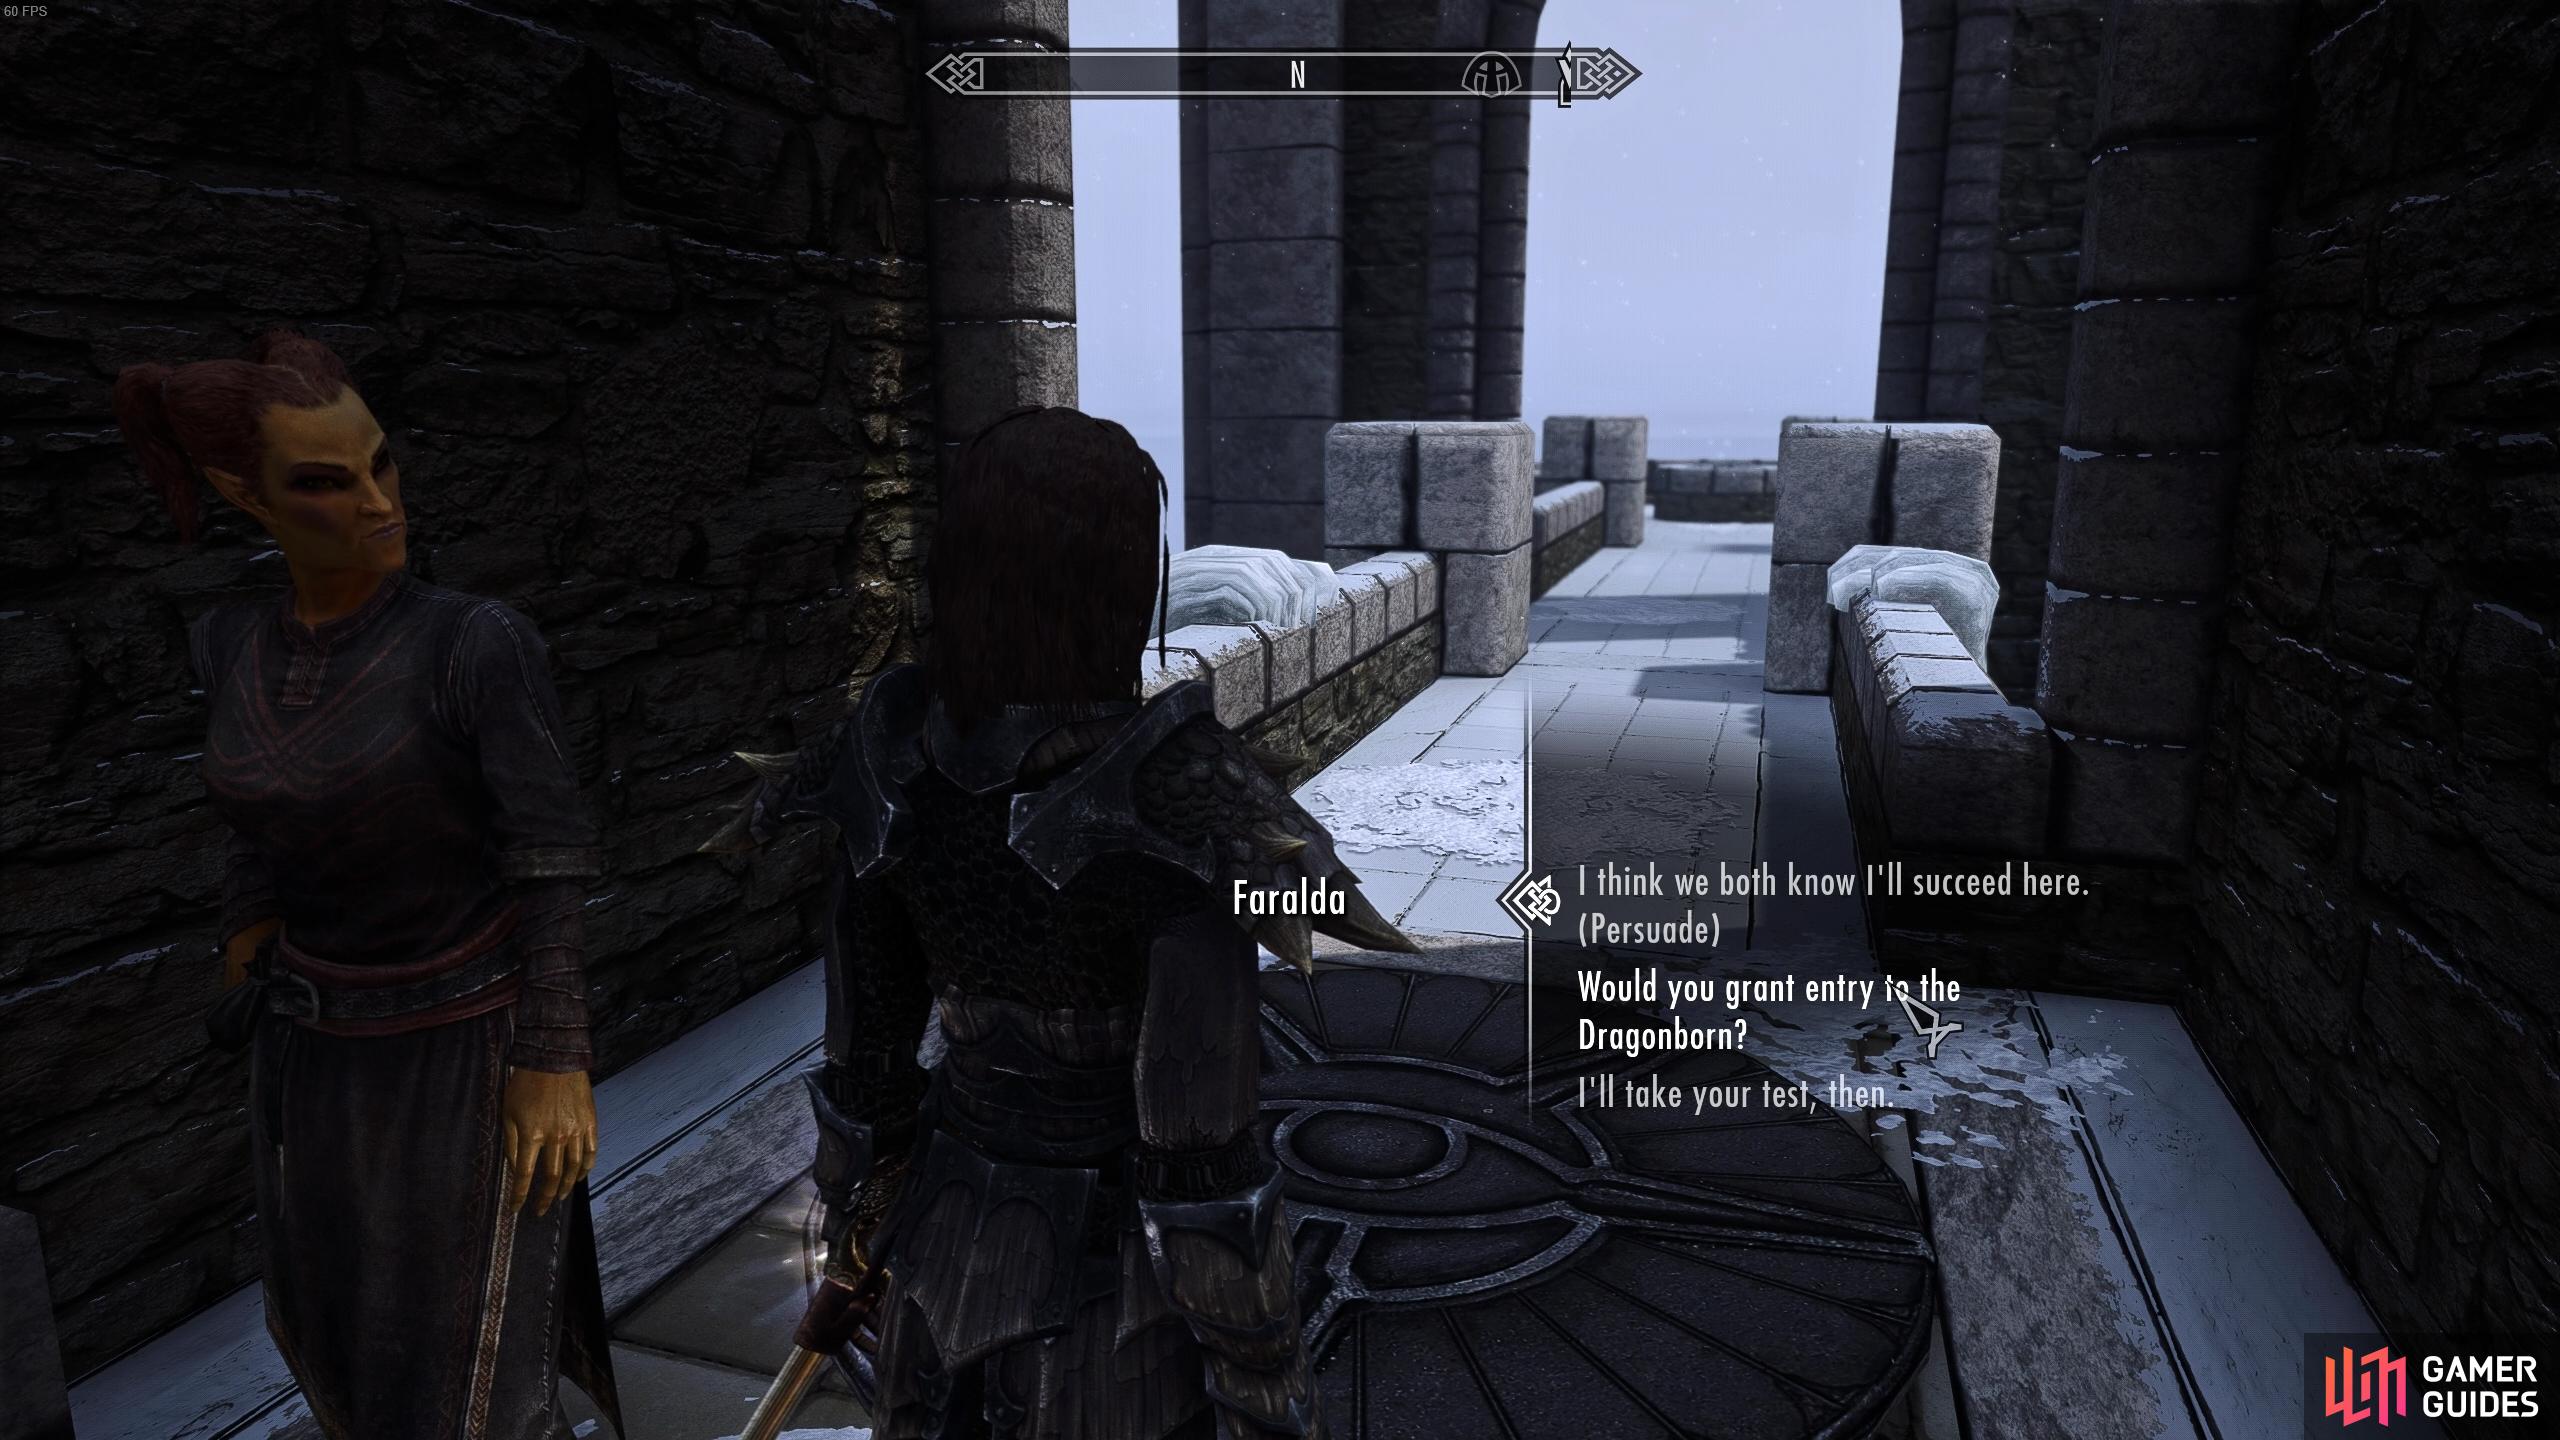 You'll need to demonstrate your power to enter the College of Winterhold.